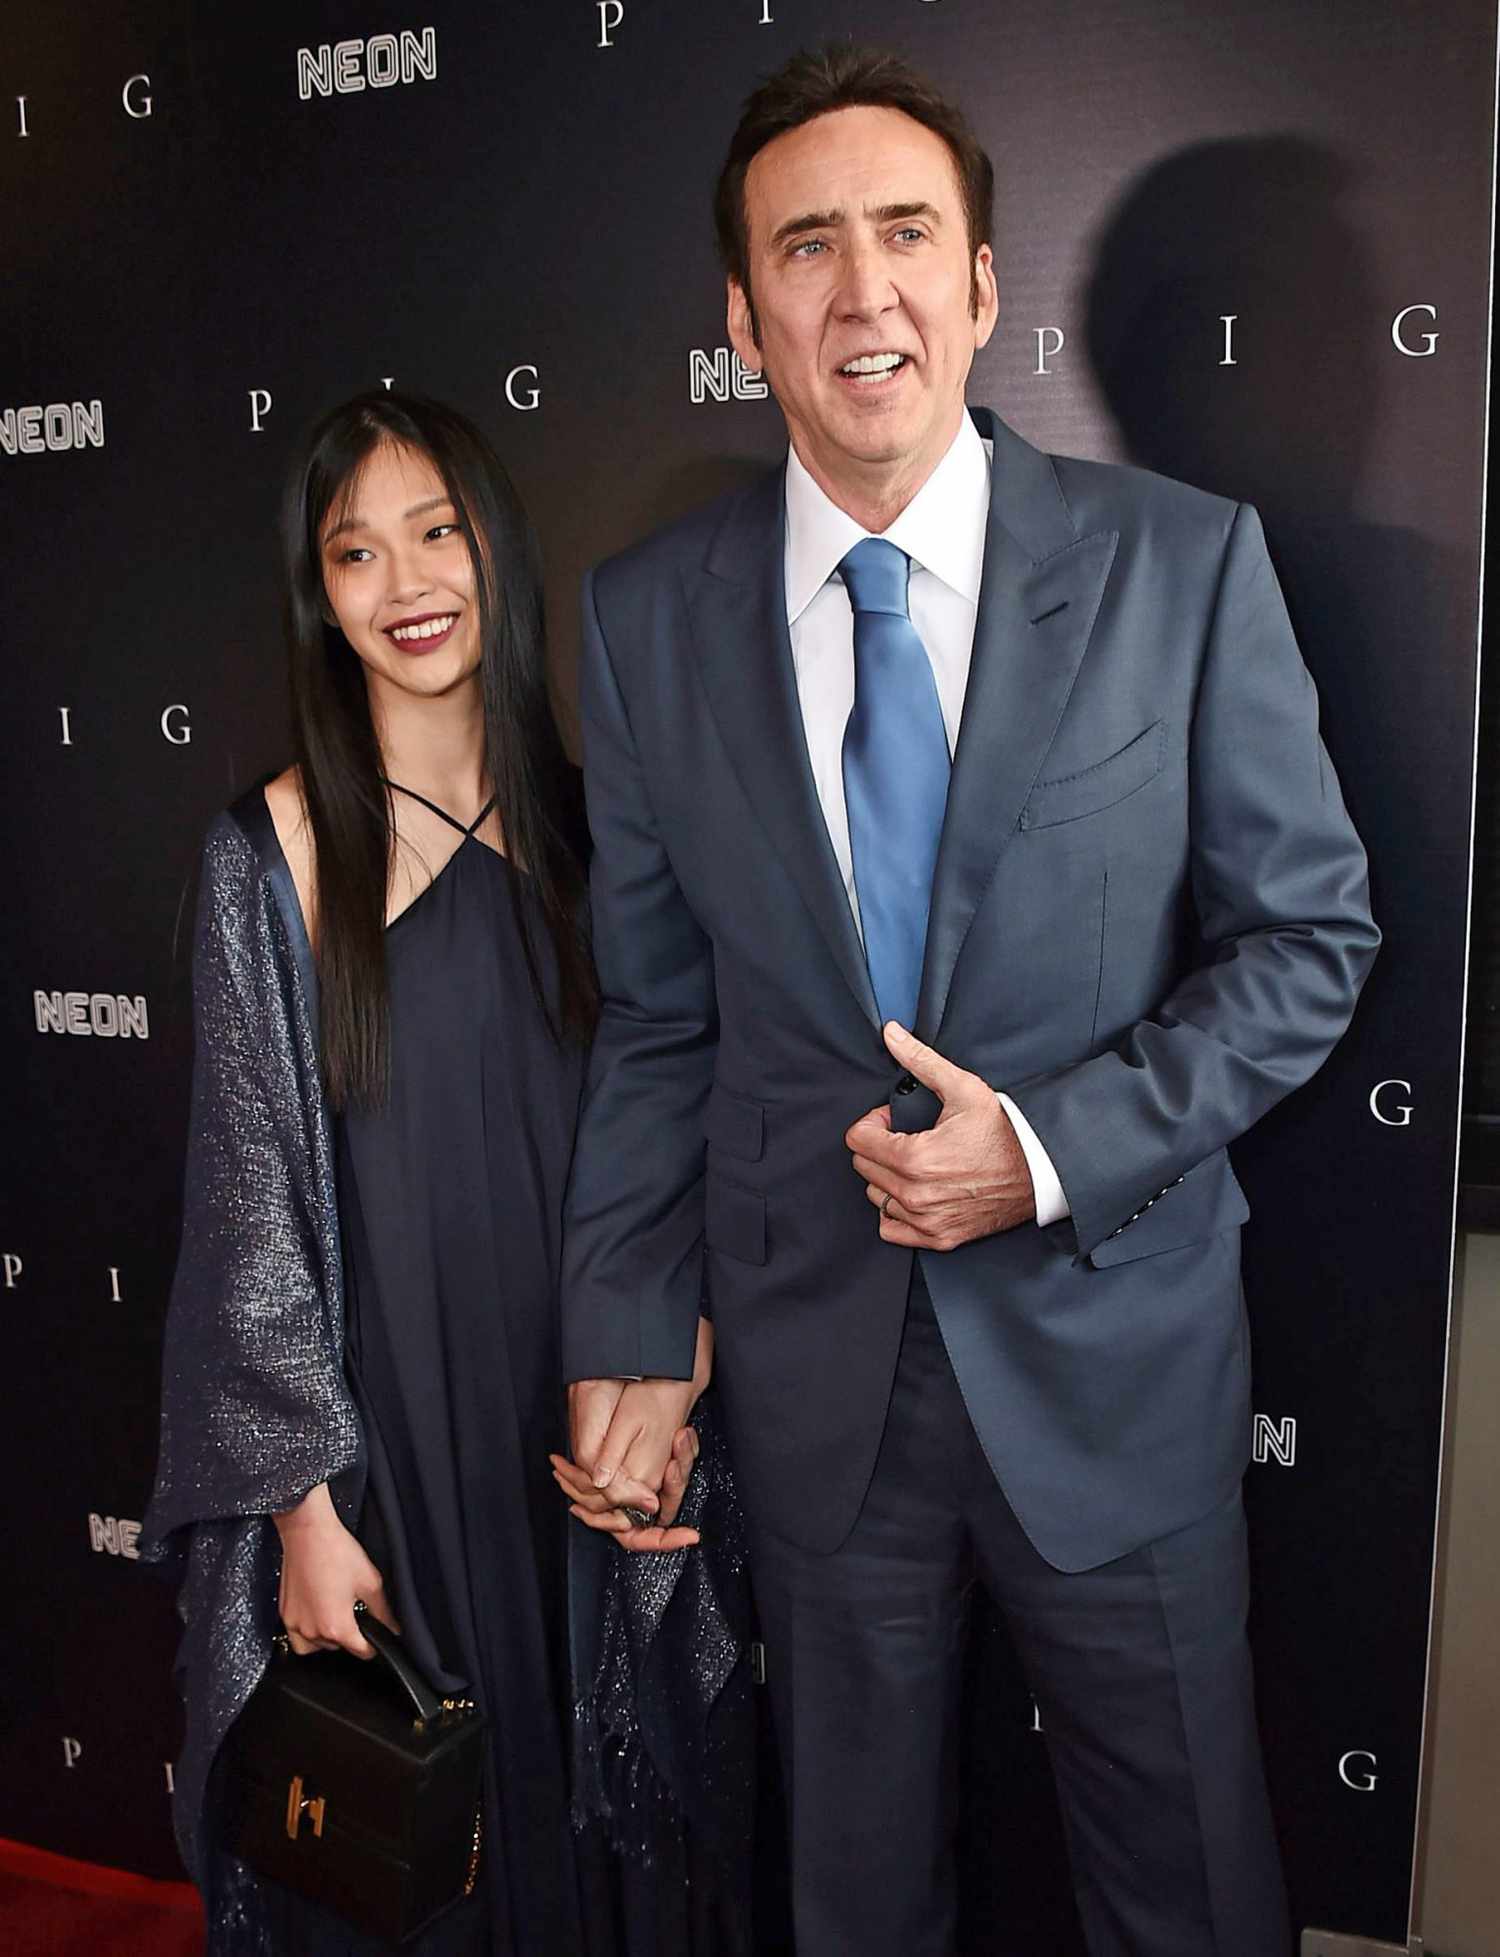 Riko Shibata, left, and Nicolas Cage arrive at the Los Angeles premiere of "Pig", at the Nuart Theatre